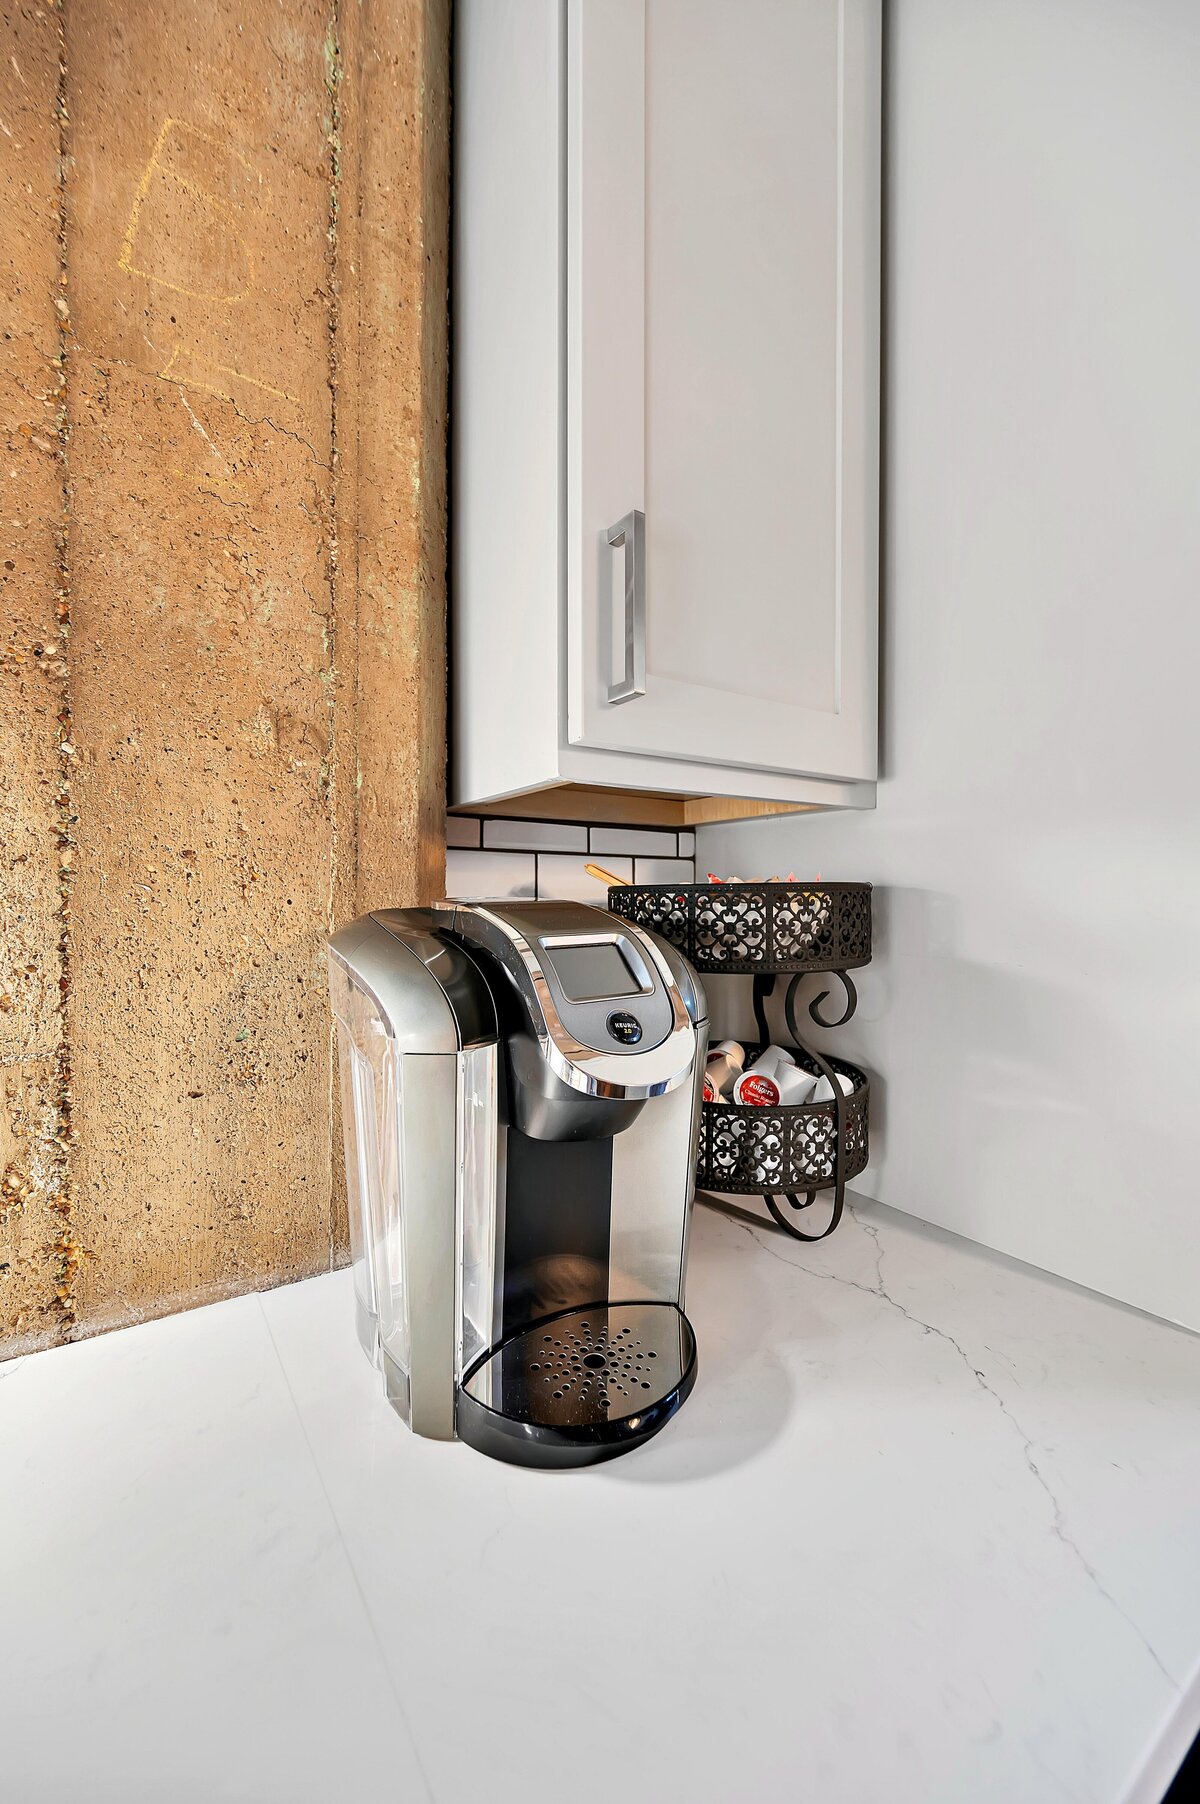 Keurig coffee maker with coffee pods in the fully stocked kitchen of this one-bedroom, one-bathroom vintage industrial condo with Smart TV, free Wi-Fi, and washer/dryer located in downtown Waco, TX.